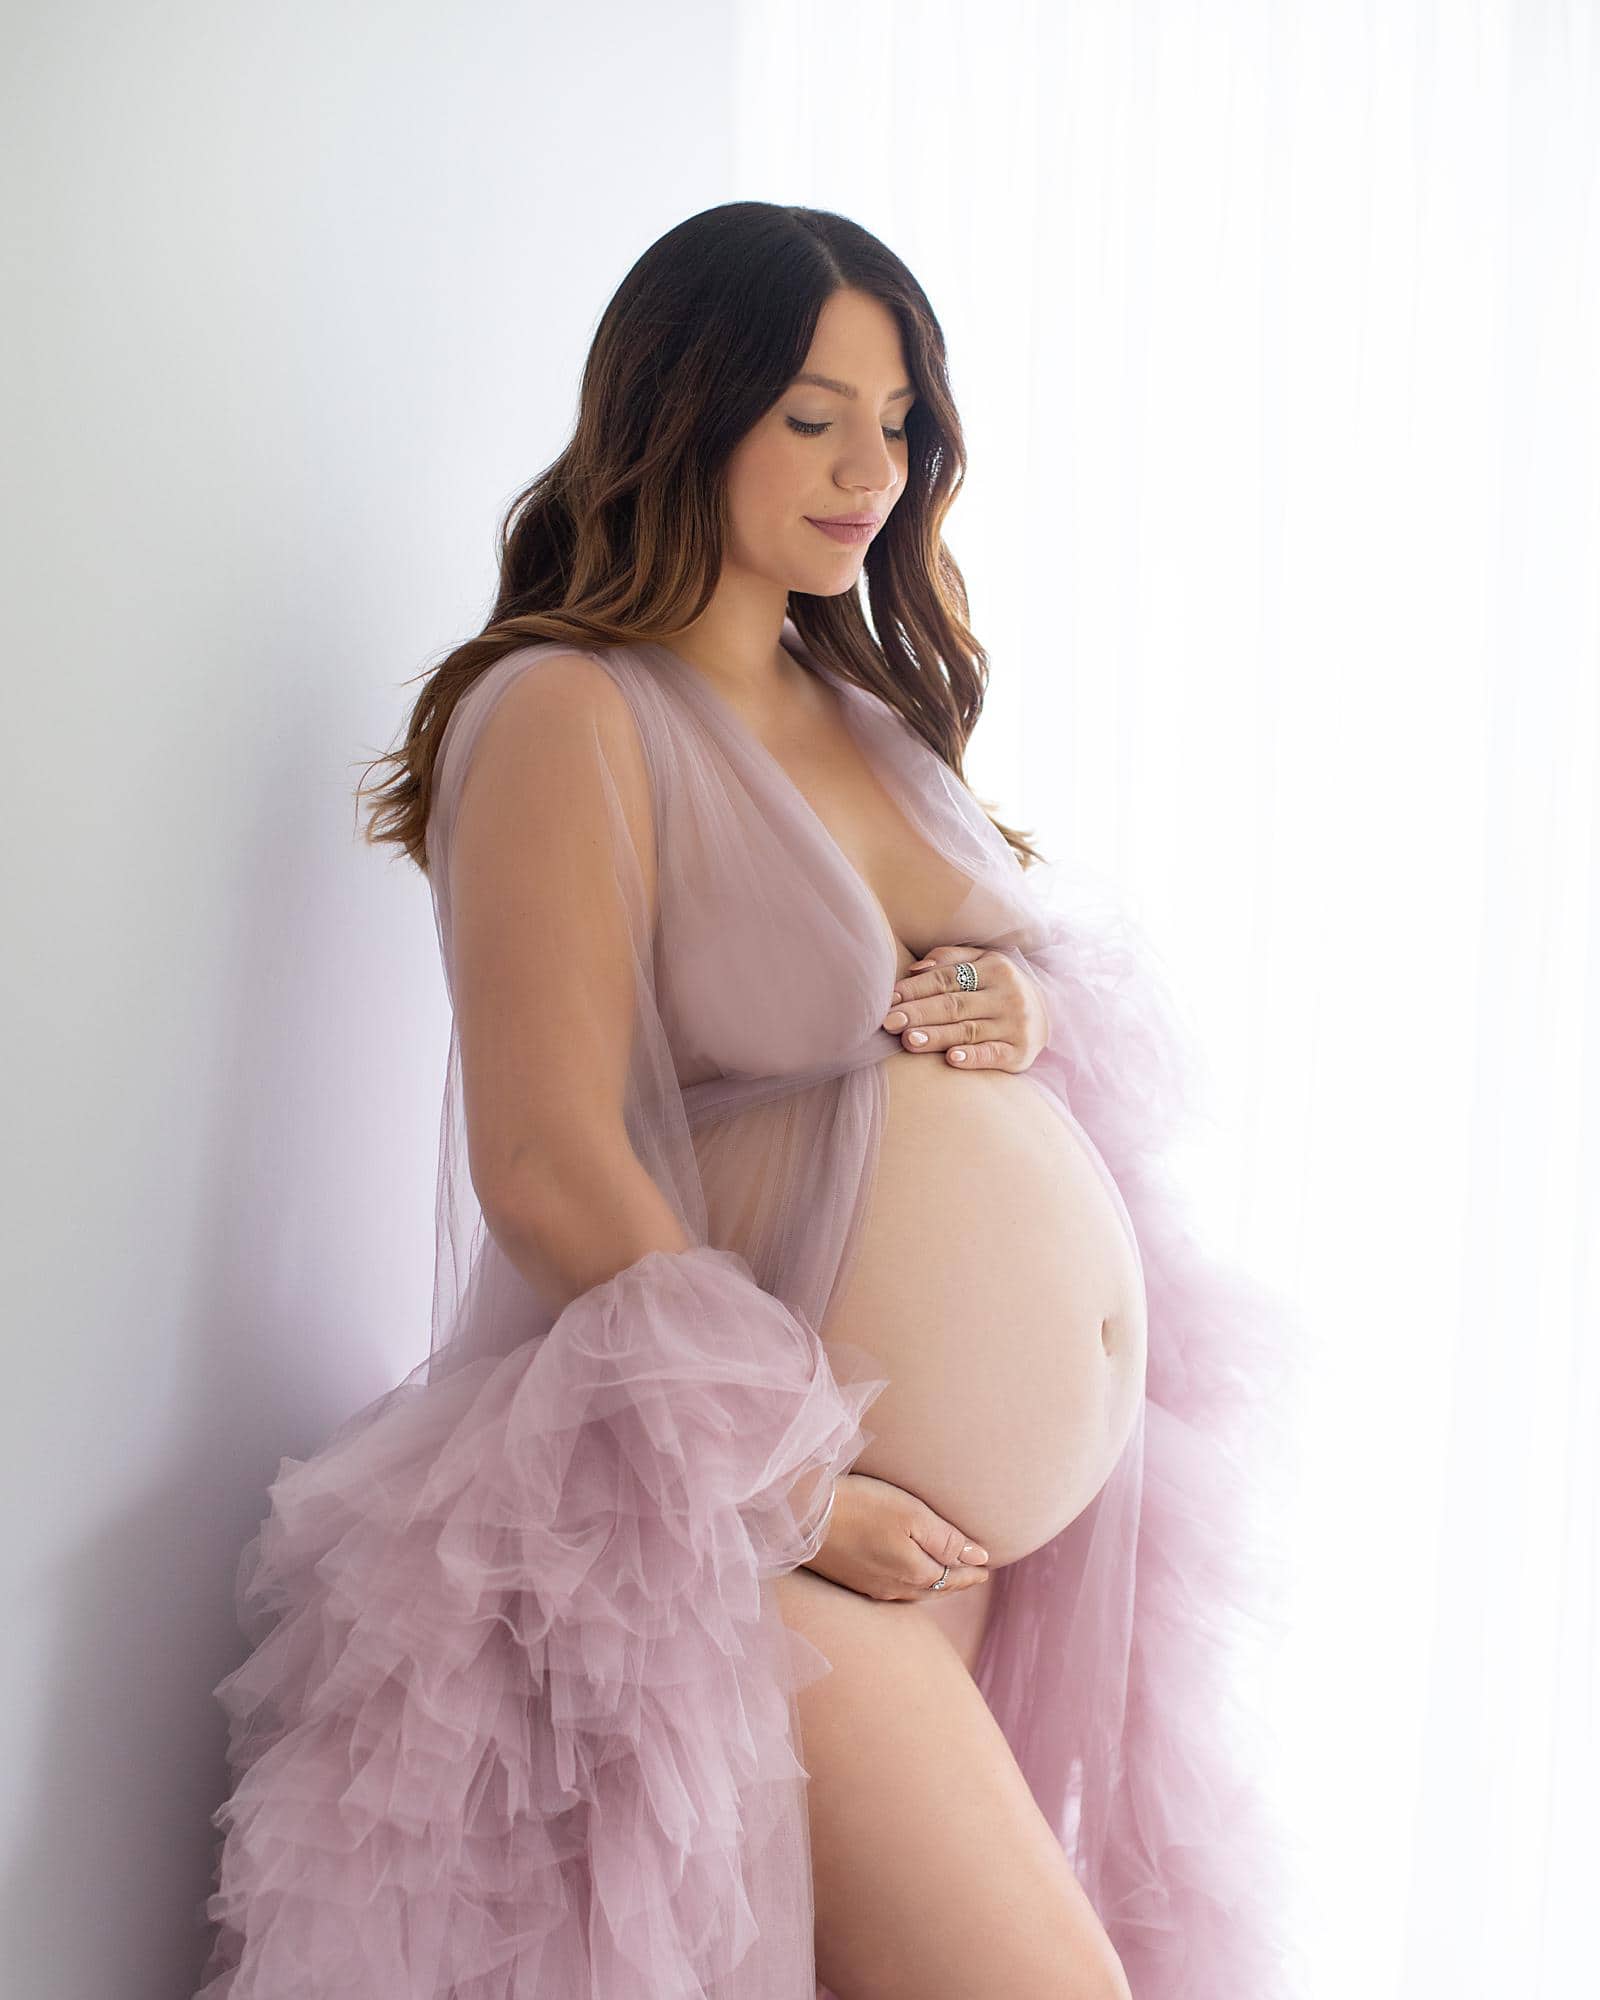 Pregnant woman posing against a white backdrop with a sheer pink gown for a maternity photoshoot in Suffolk photography studio